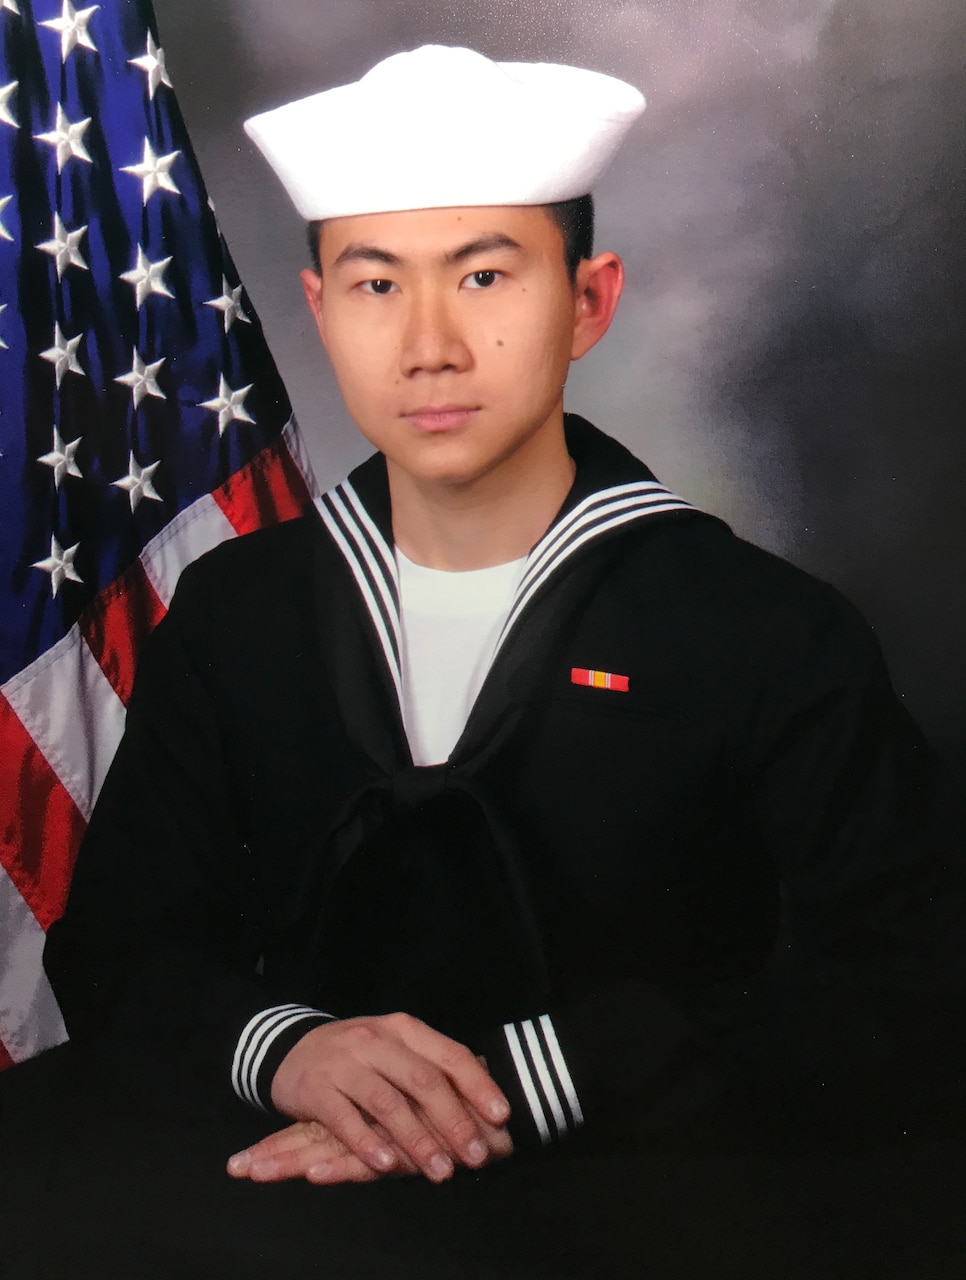 RS2 Nguyen boot camp photo from 2016